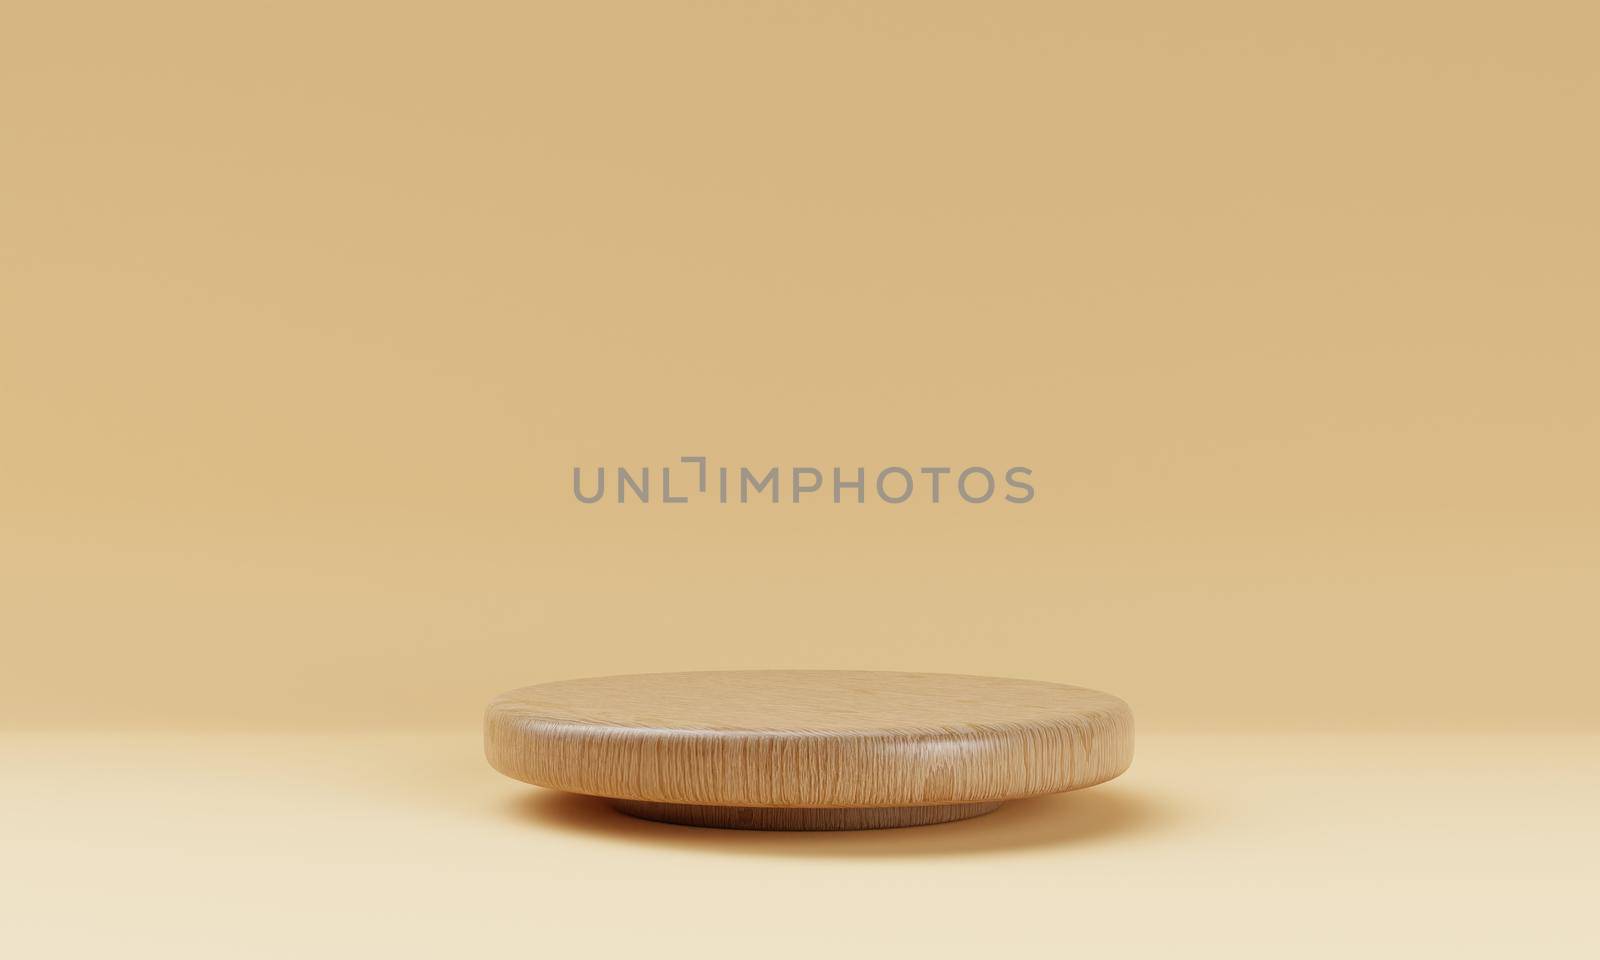 One brown wooden round cylinder product stage podium on orange background. Minimal fashion theme. Geometry exhibition stage mockup concept. 3D illustration rendering